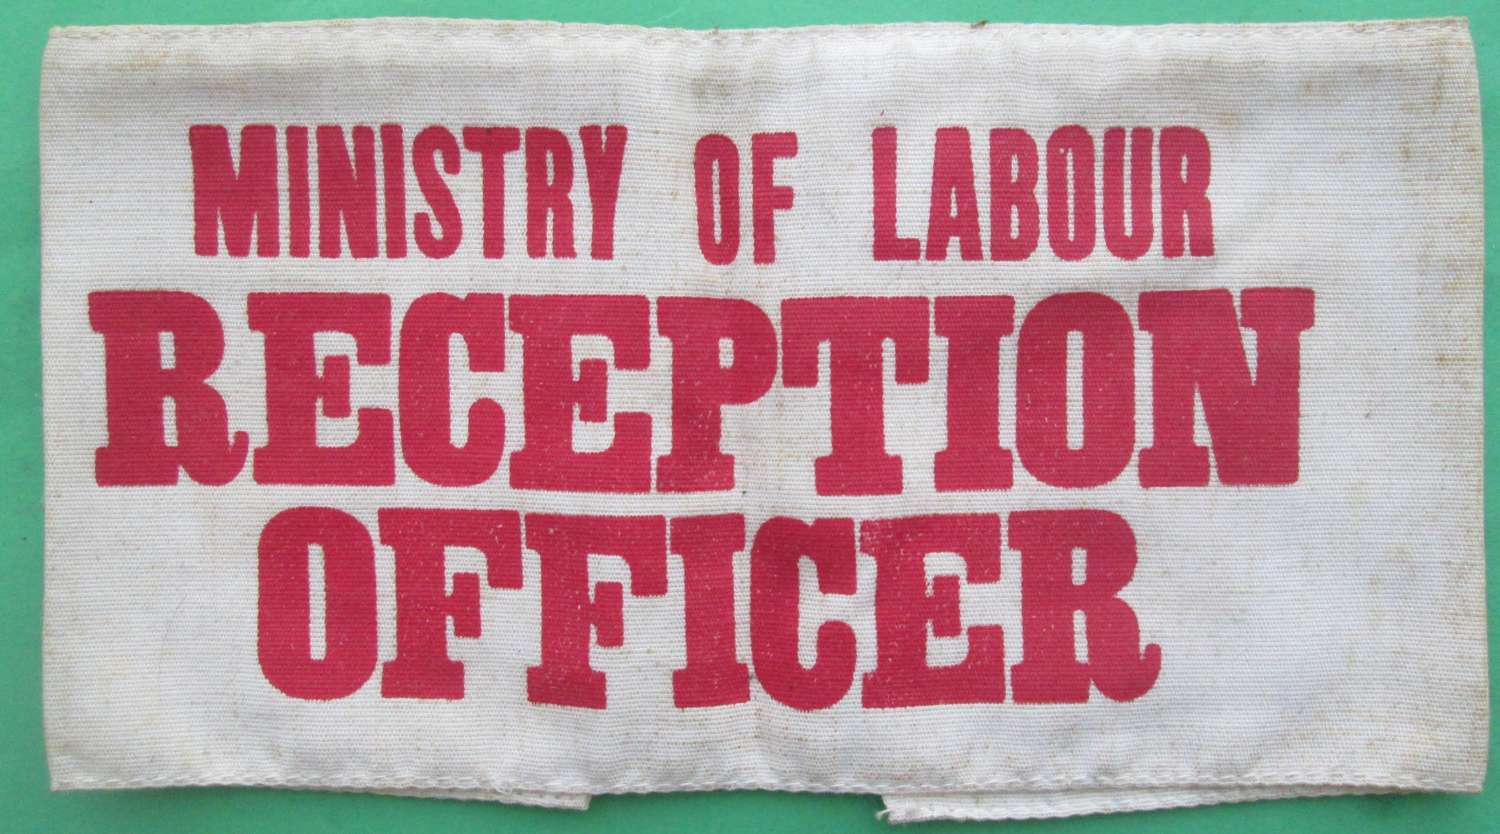 A MINISTRY OF LABOUR RECEPTION OFFICER